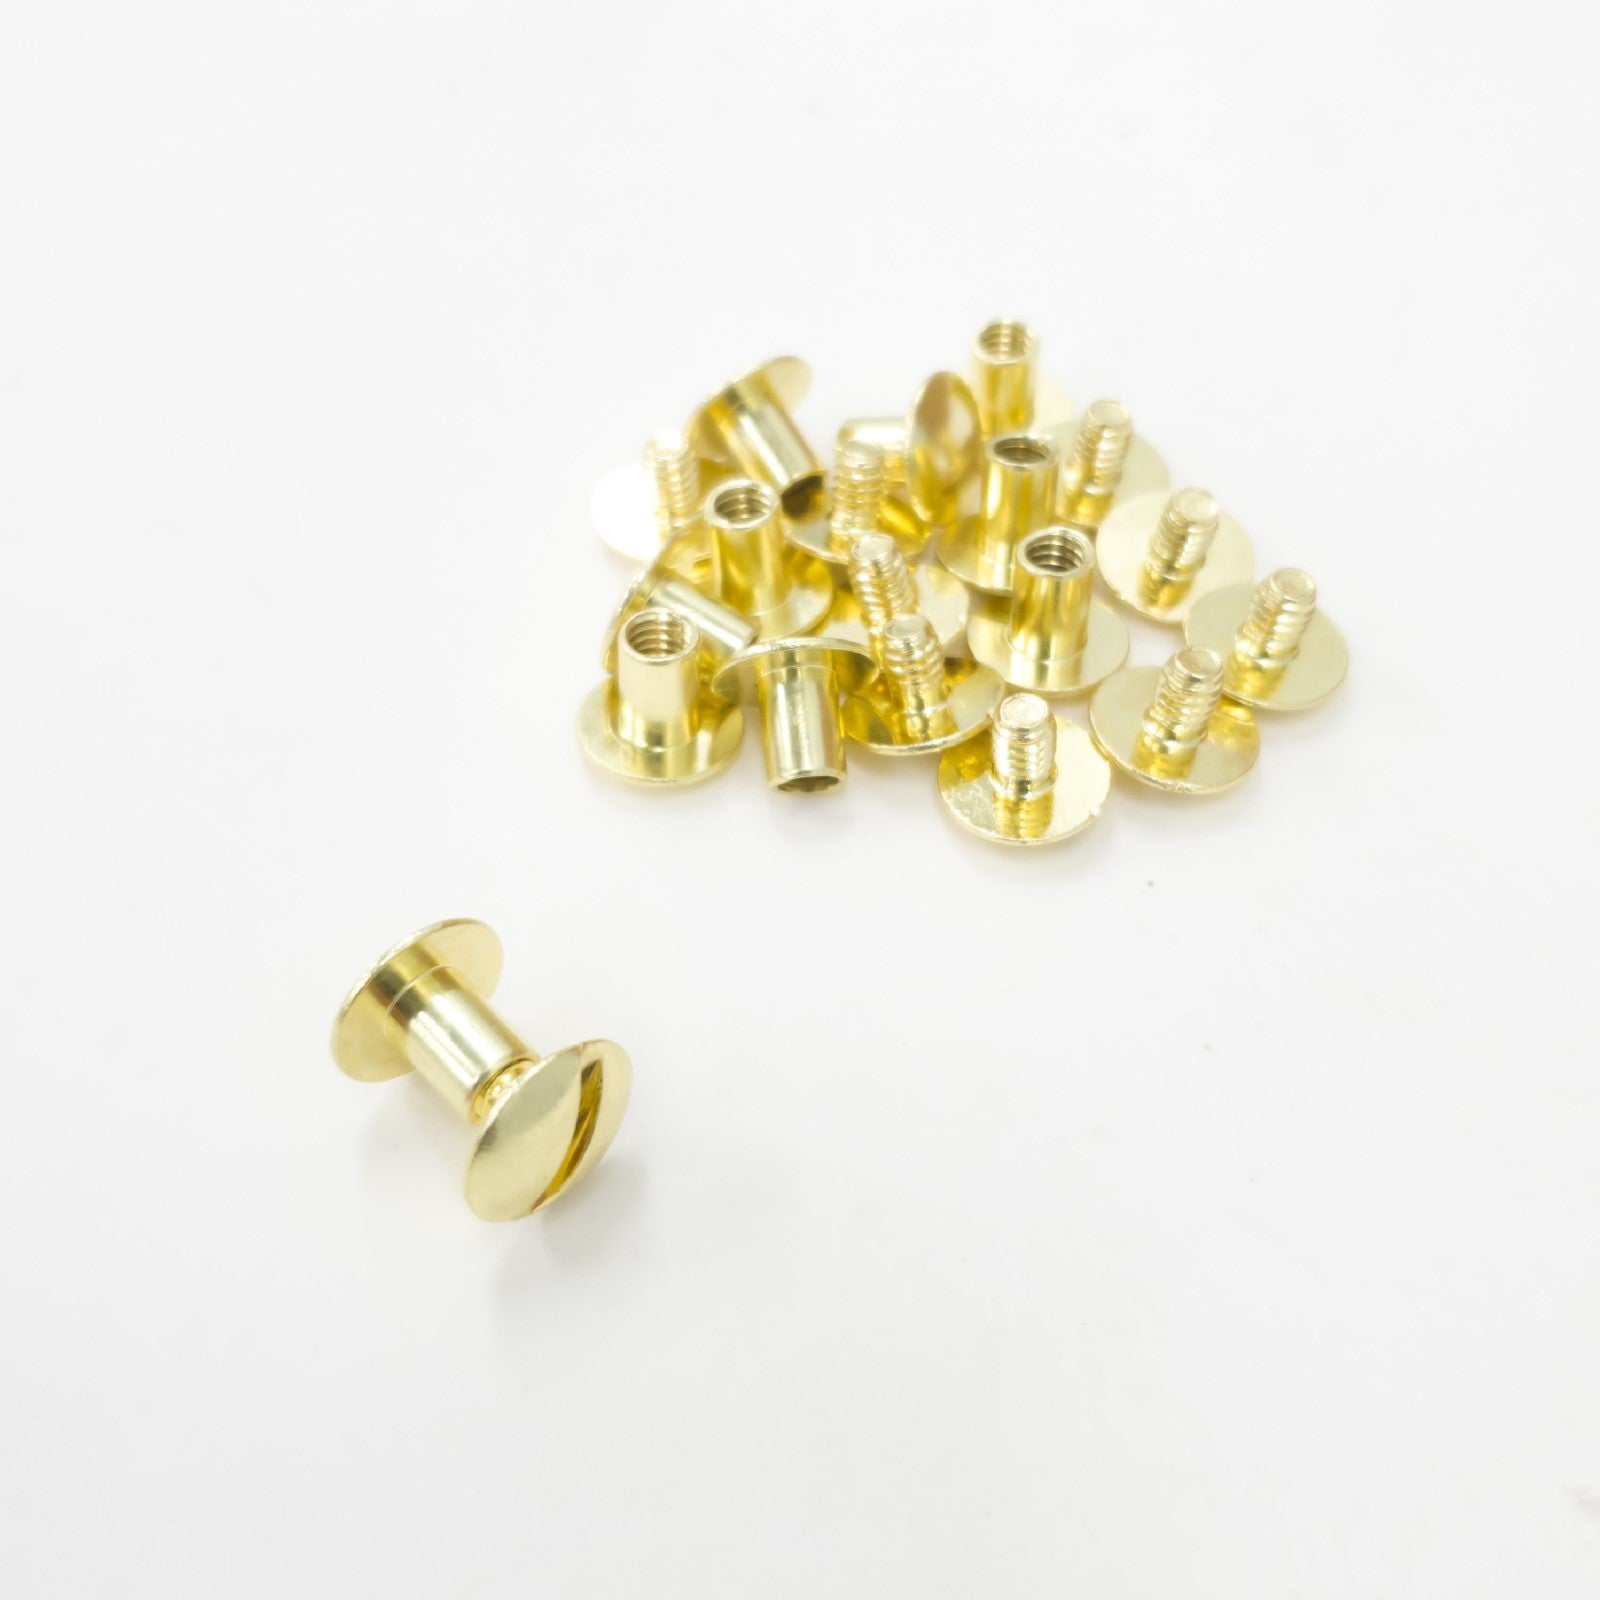 Chicago Screws, 6 mm/ 1/4", 10 Pack, Brass | The Leather Guy